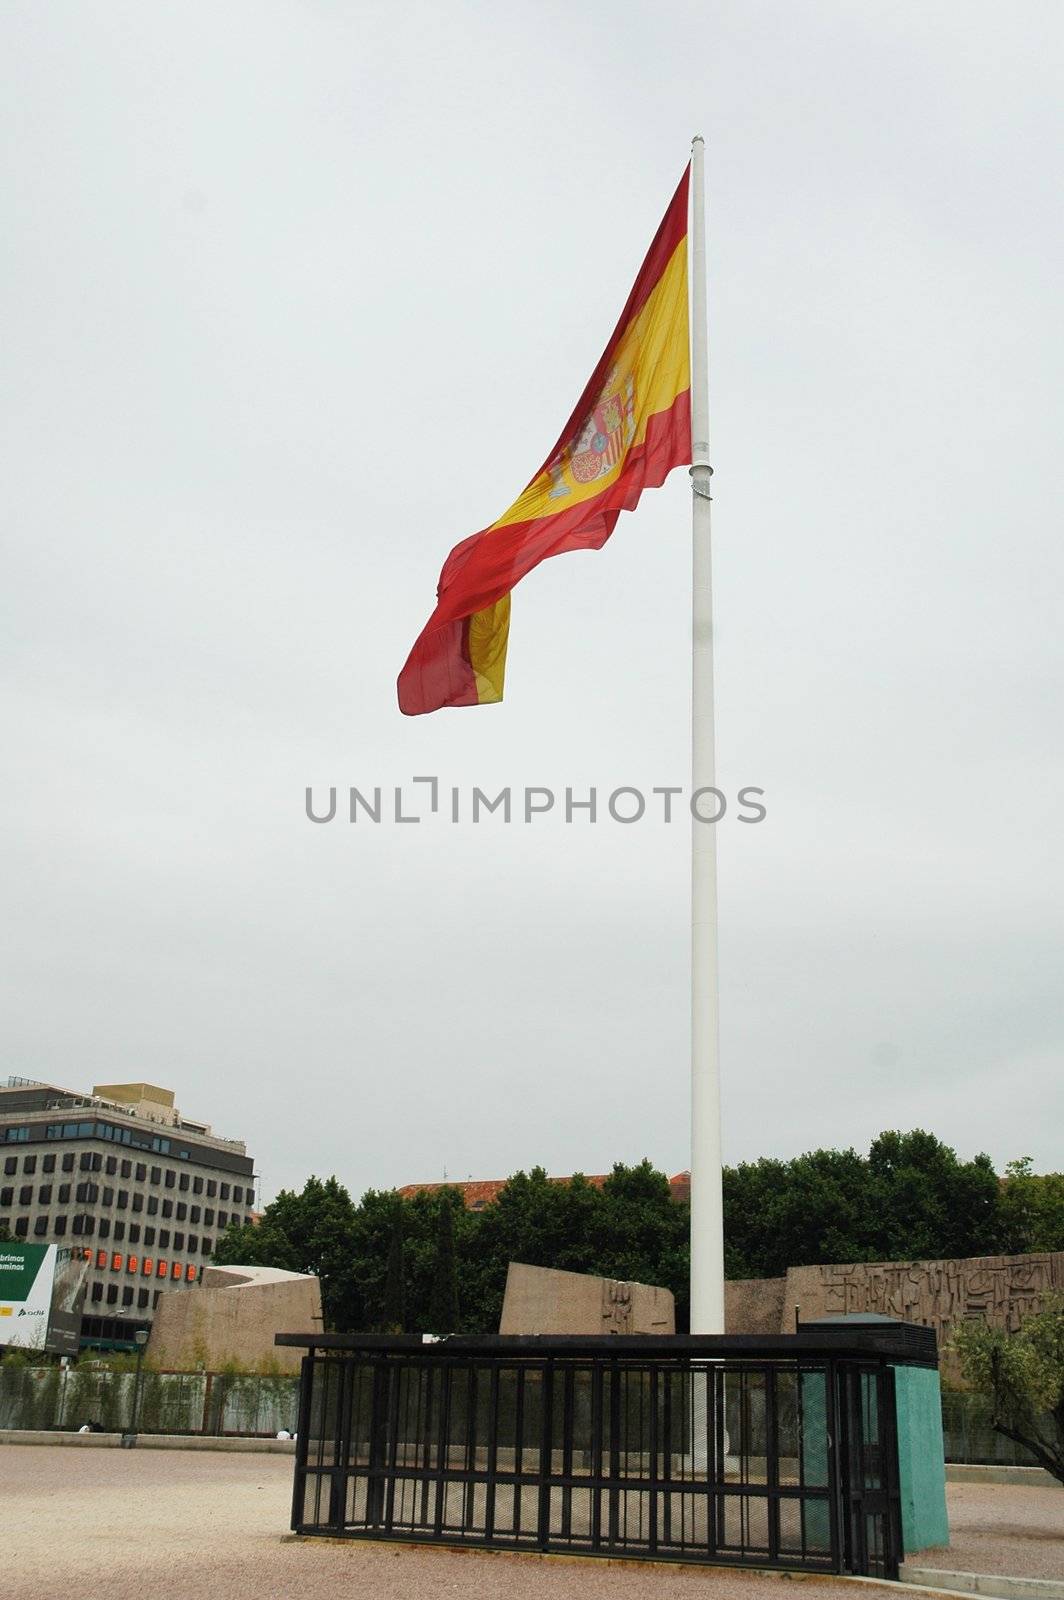 spanish flag in madrid with sky, vertically framed picture